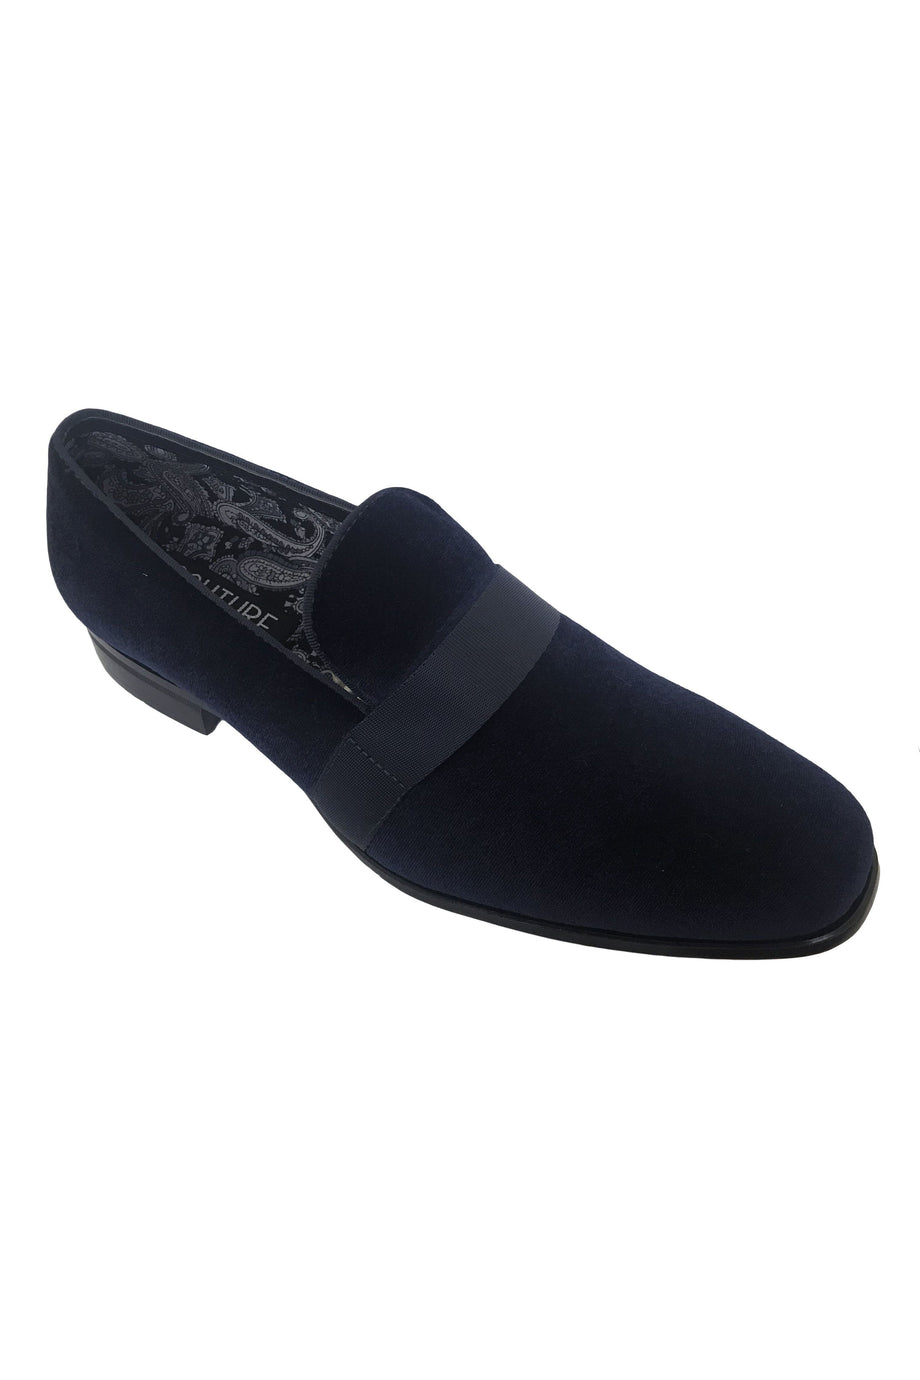 Couture 1901 "Lincoln" Navy Couture 1901 Tuxedo Shoes